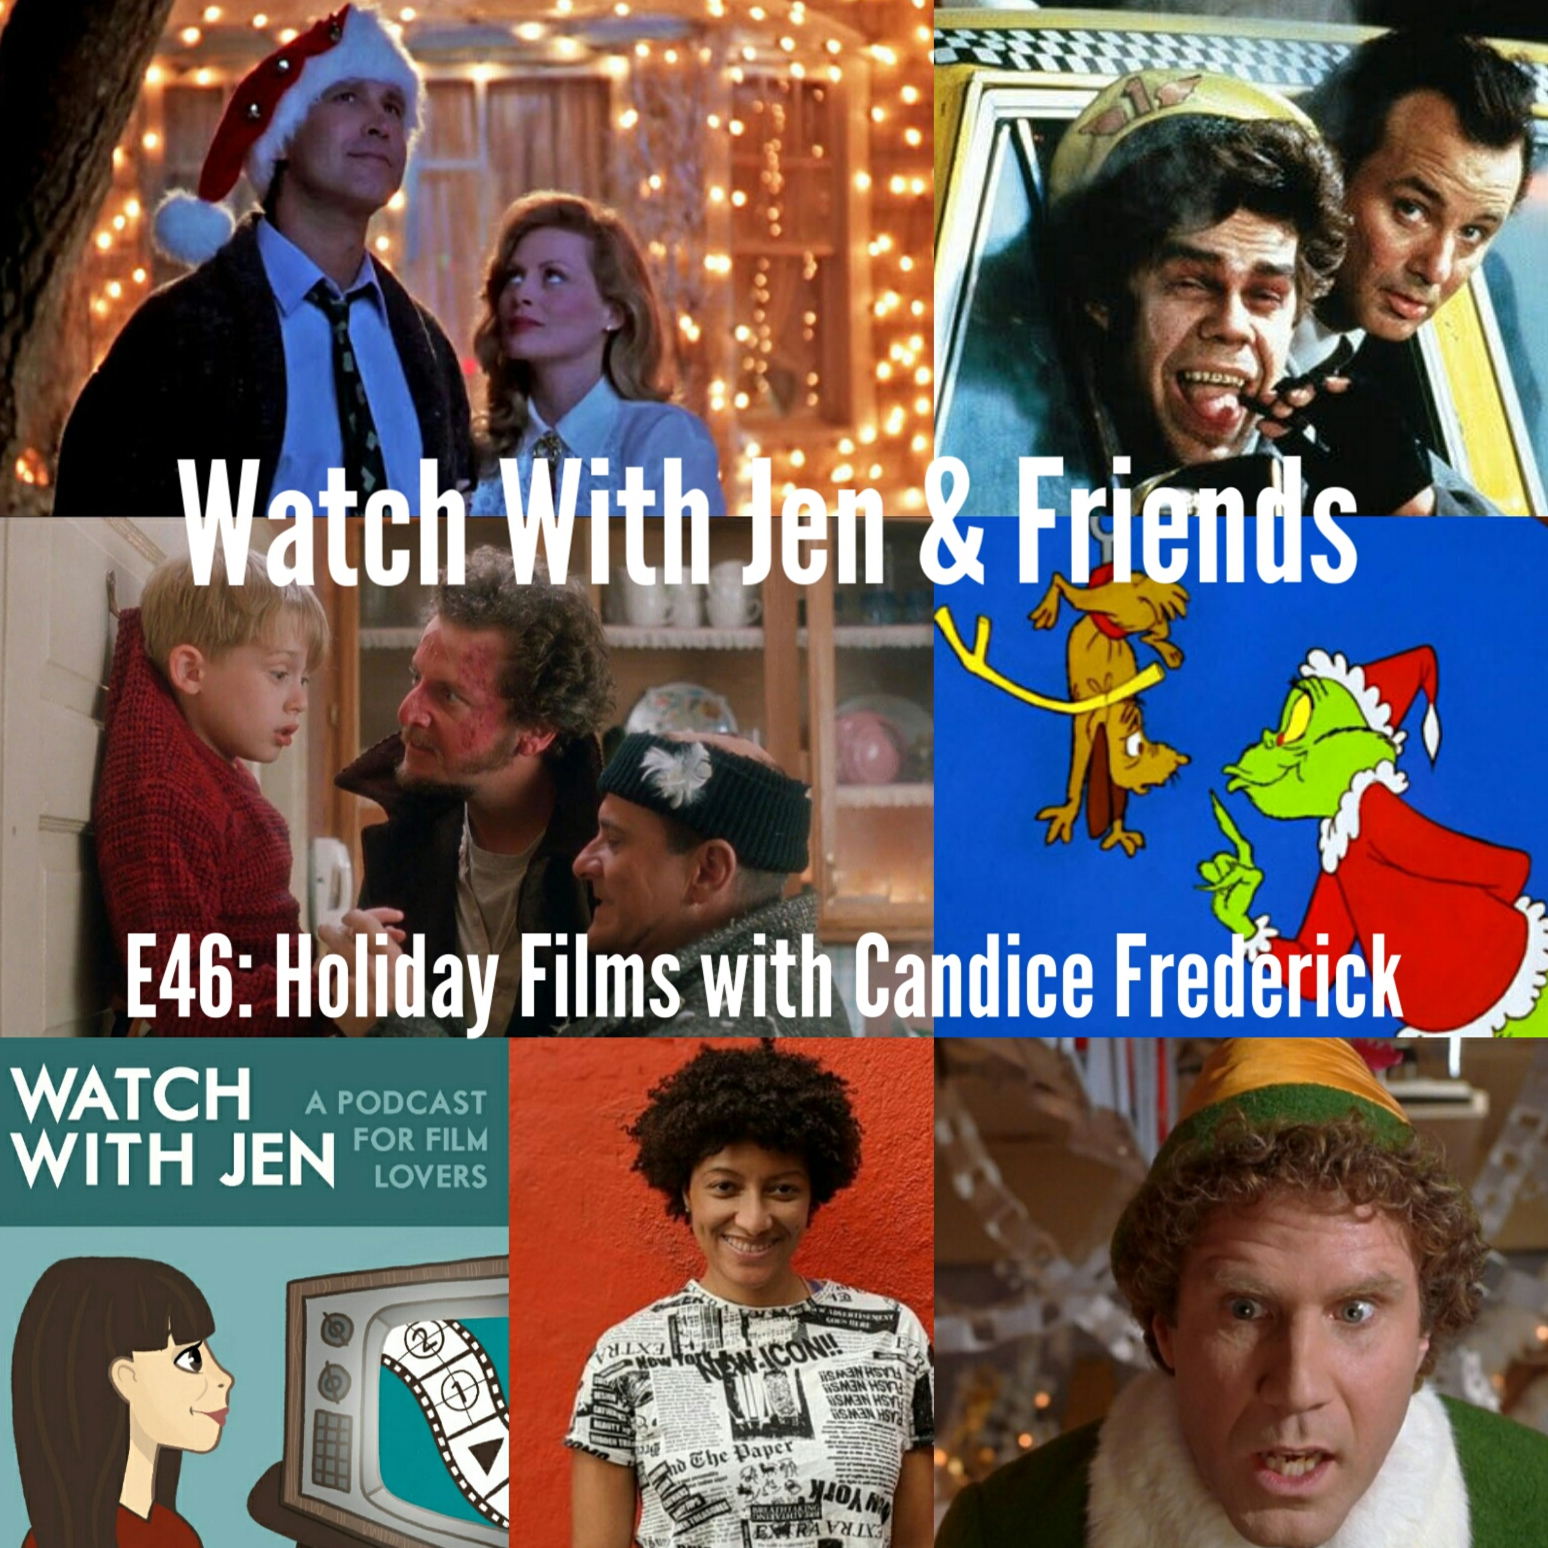 Watch With Jen & Friends: Episode 46 - Holiday Films with Candice Frederick